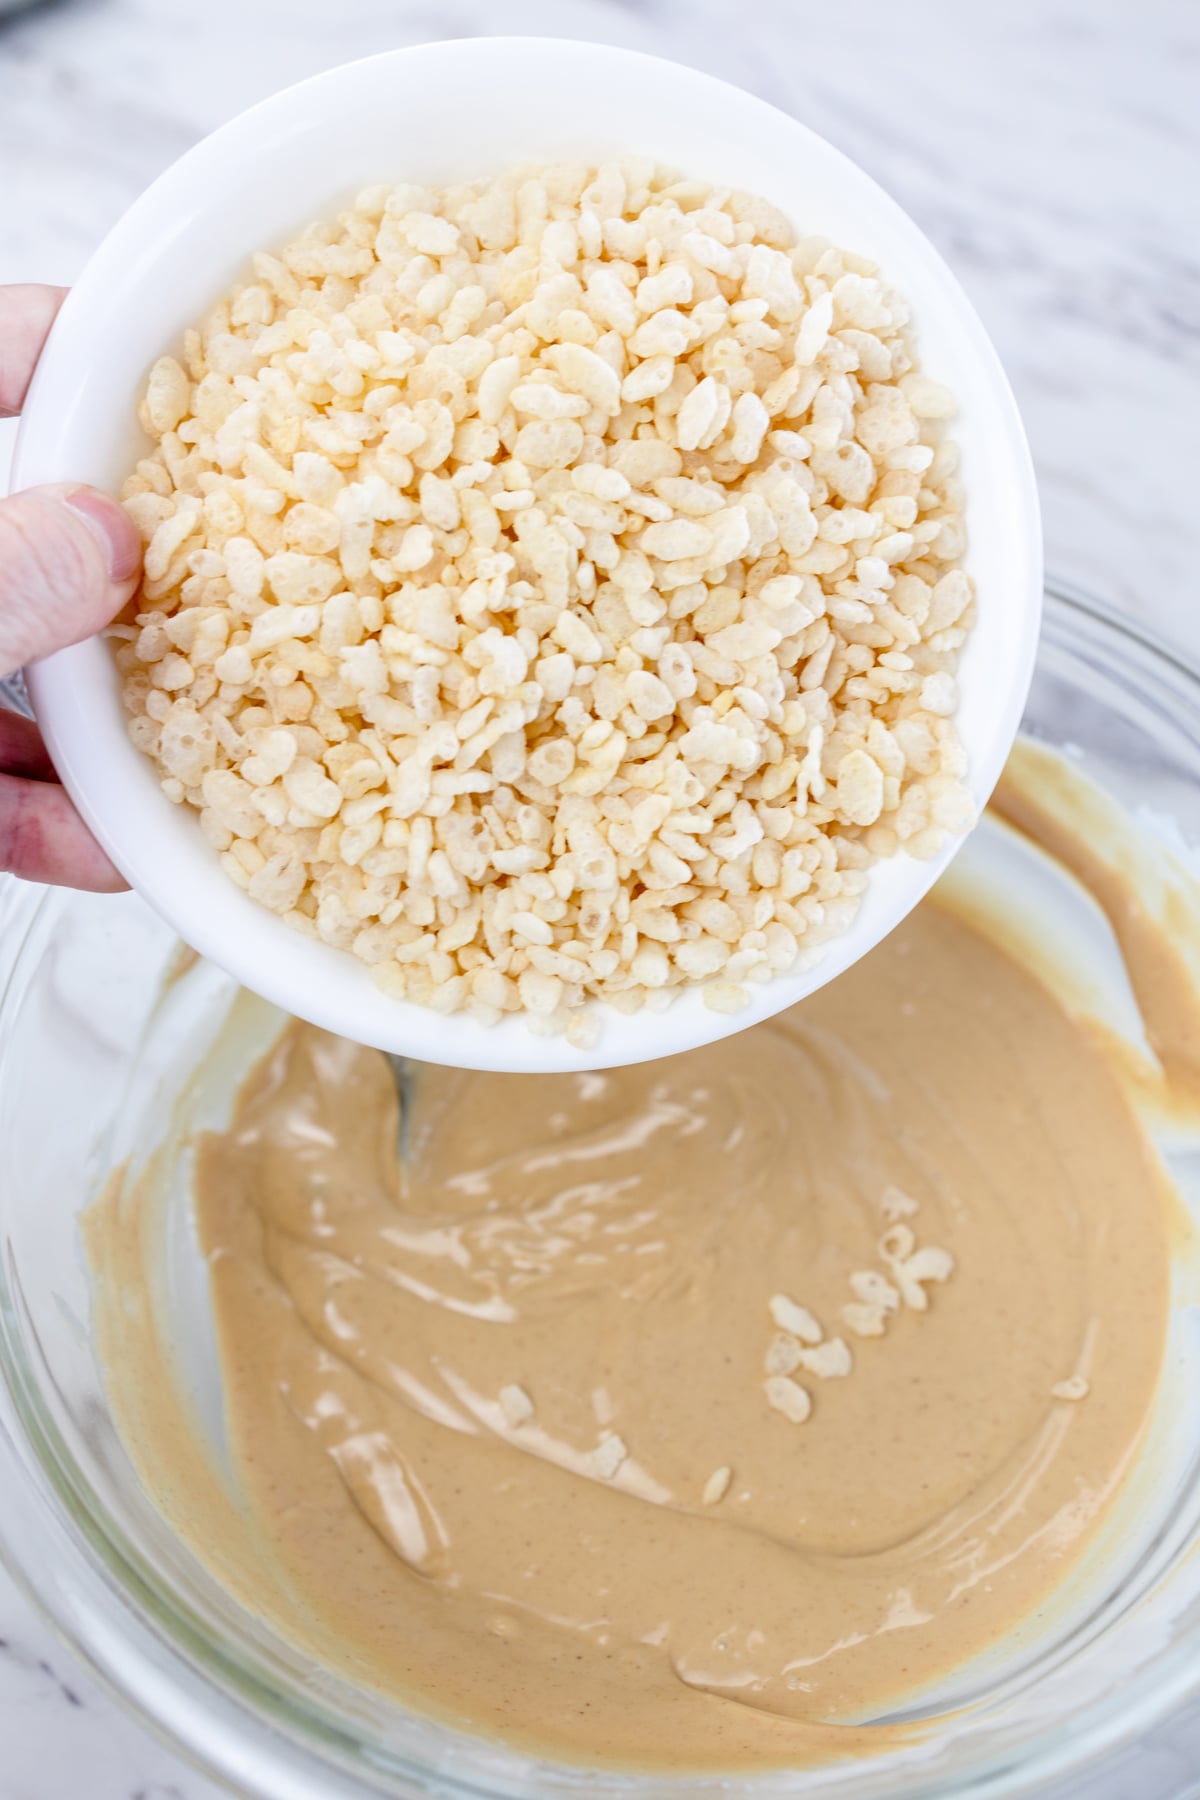 Top view of a white bowl of Rice Krispies about to be poured into a glass mixing bowl with peanut butter and almond bark mixture in it.